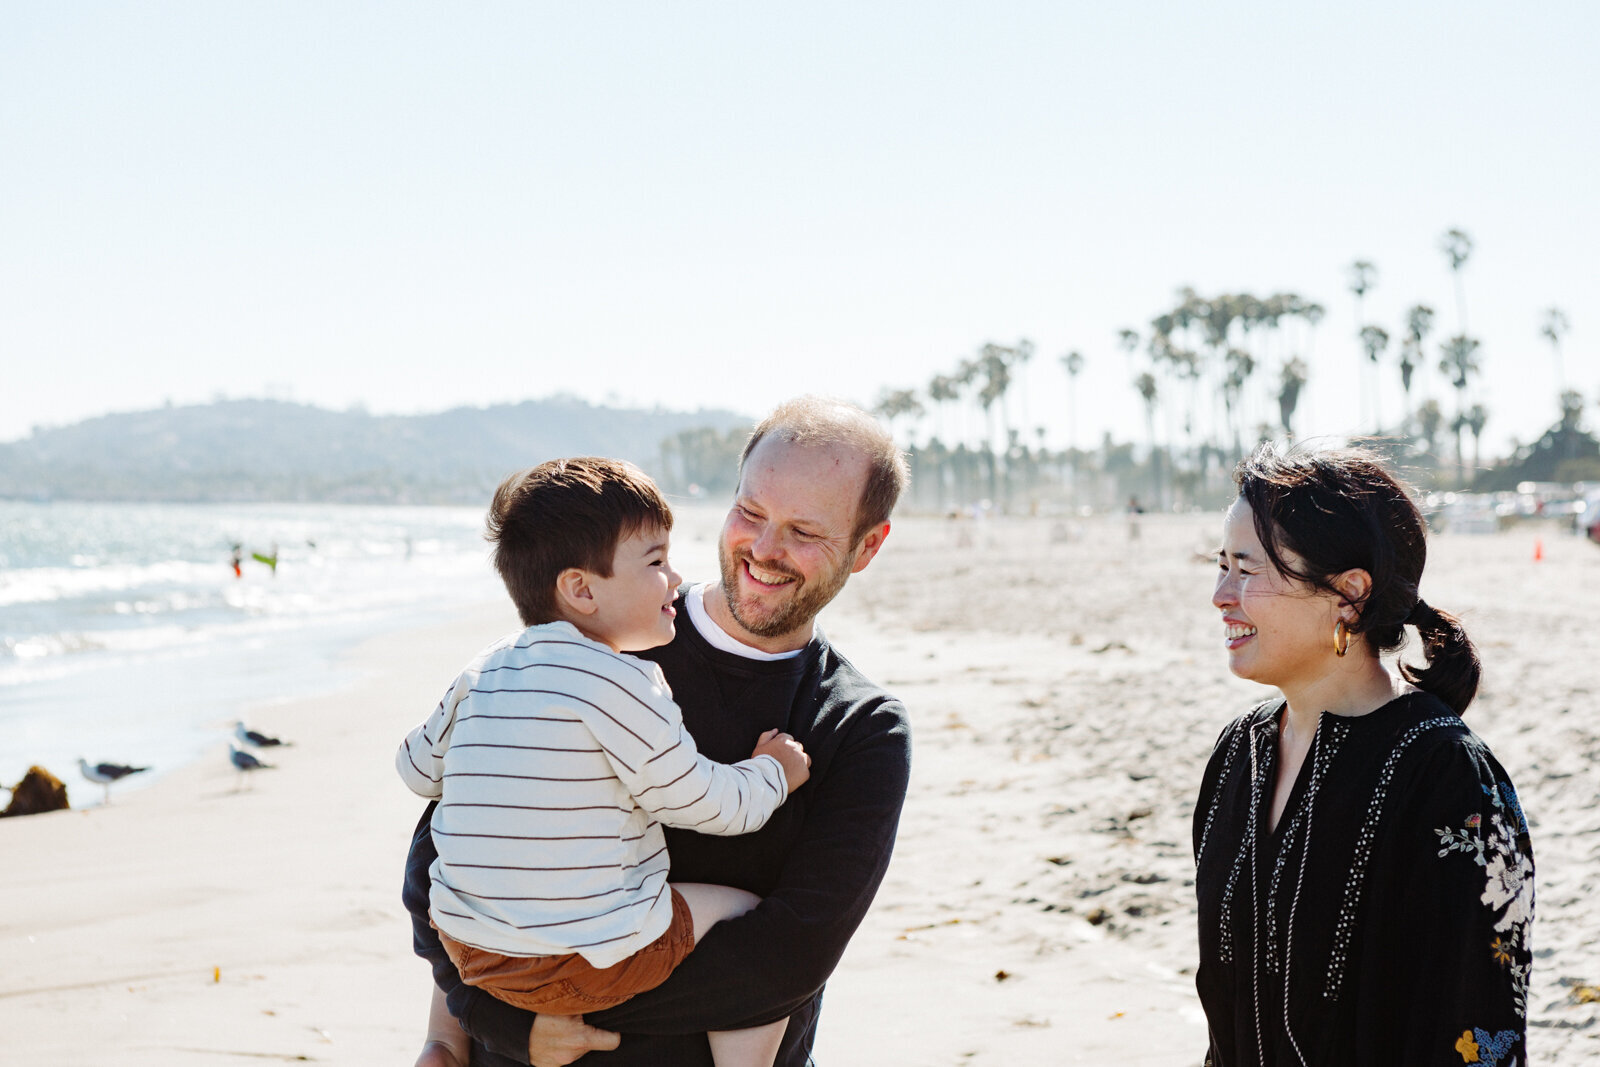 Family photo session at East Beach in Santa Barbara California by Danielle Motif Photography